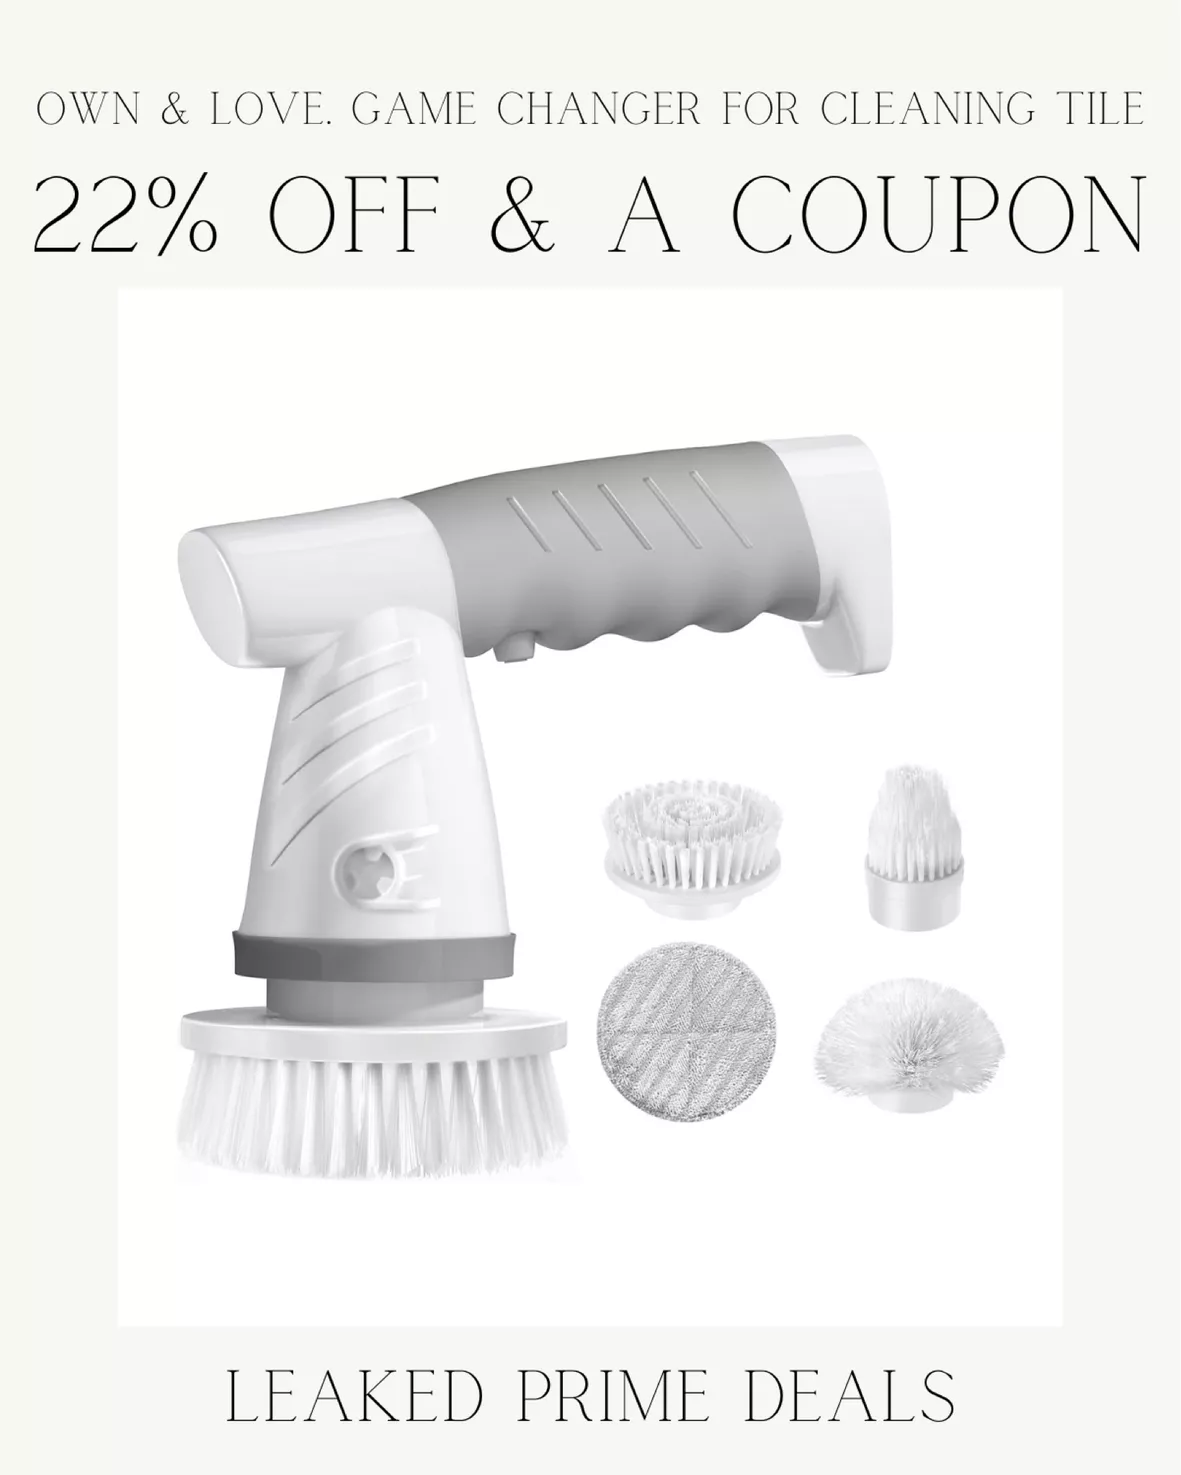 The Iezfix Handheld Electric Spin Scrubber Is on Sale at